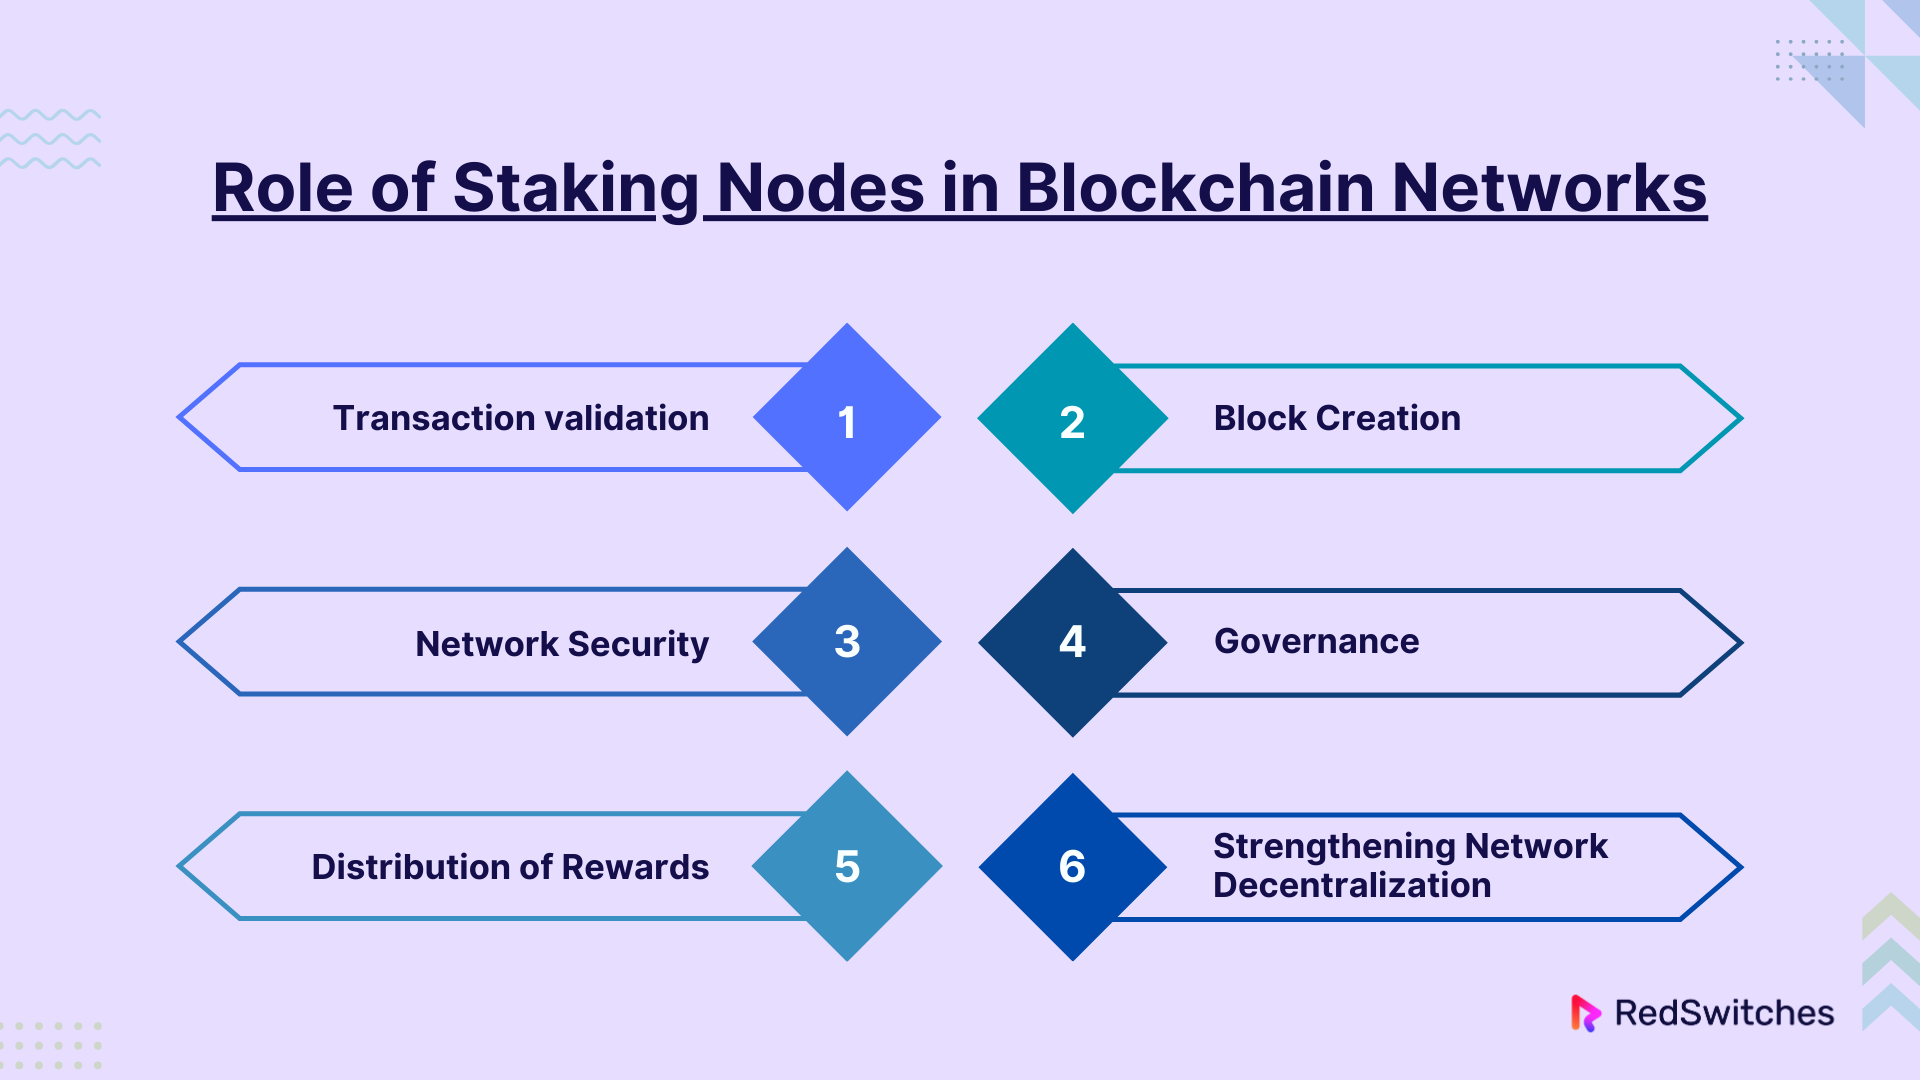 Role of Staking Nodes in Blockchain Networks